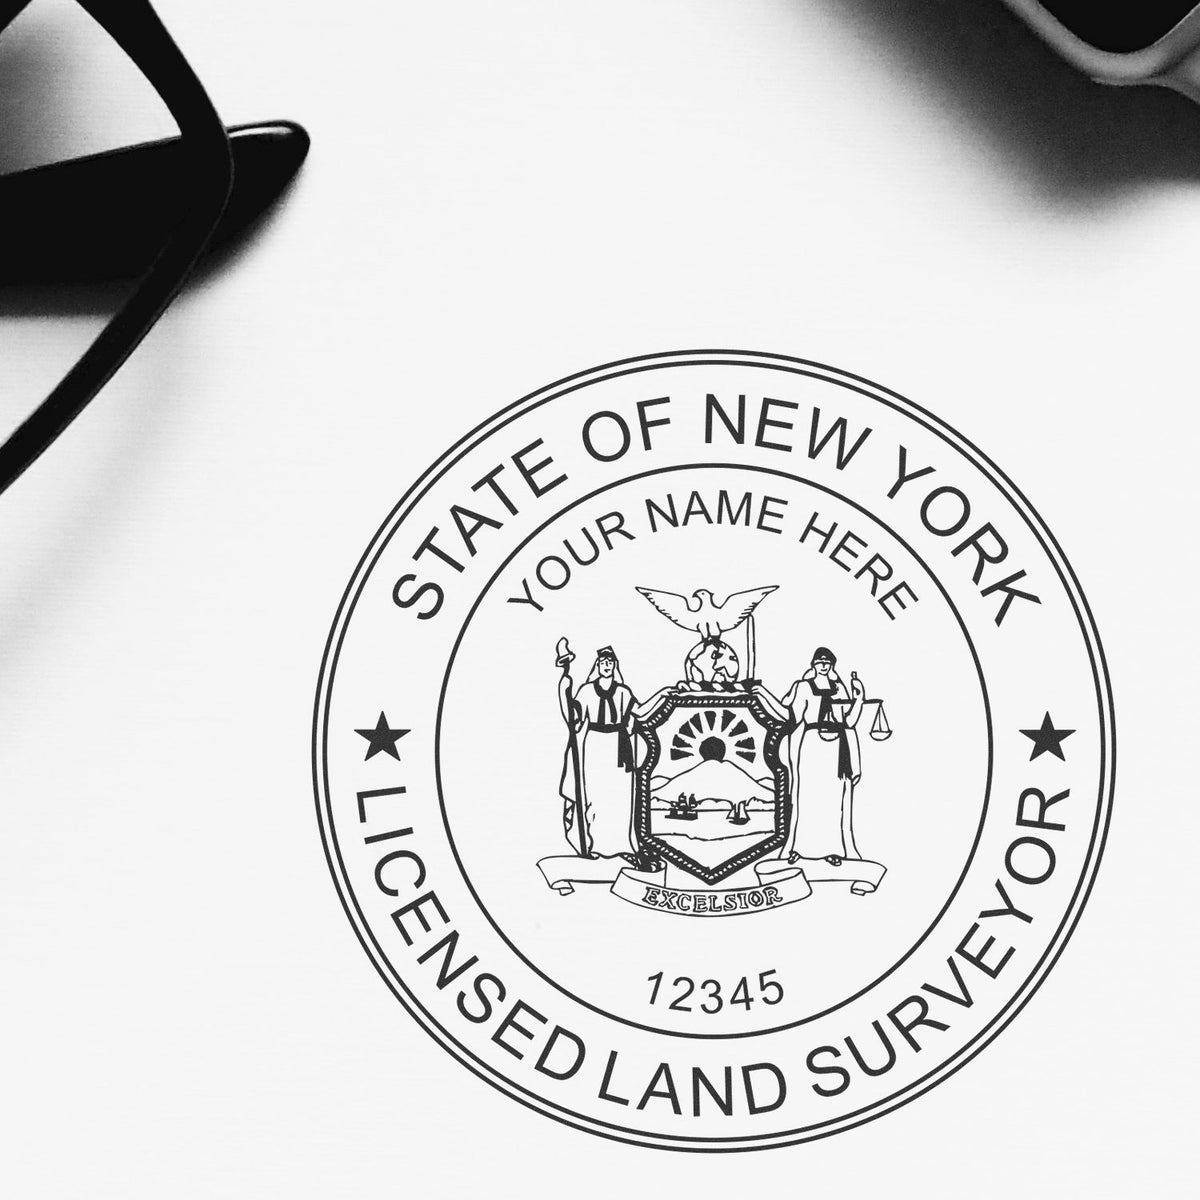 An alternative view of the Slim Pre-Inked New York Land Surveyor Seal Stamp stamped on a sheet of paper showing the image in use